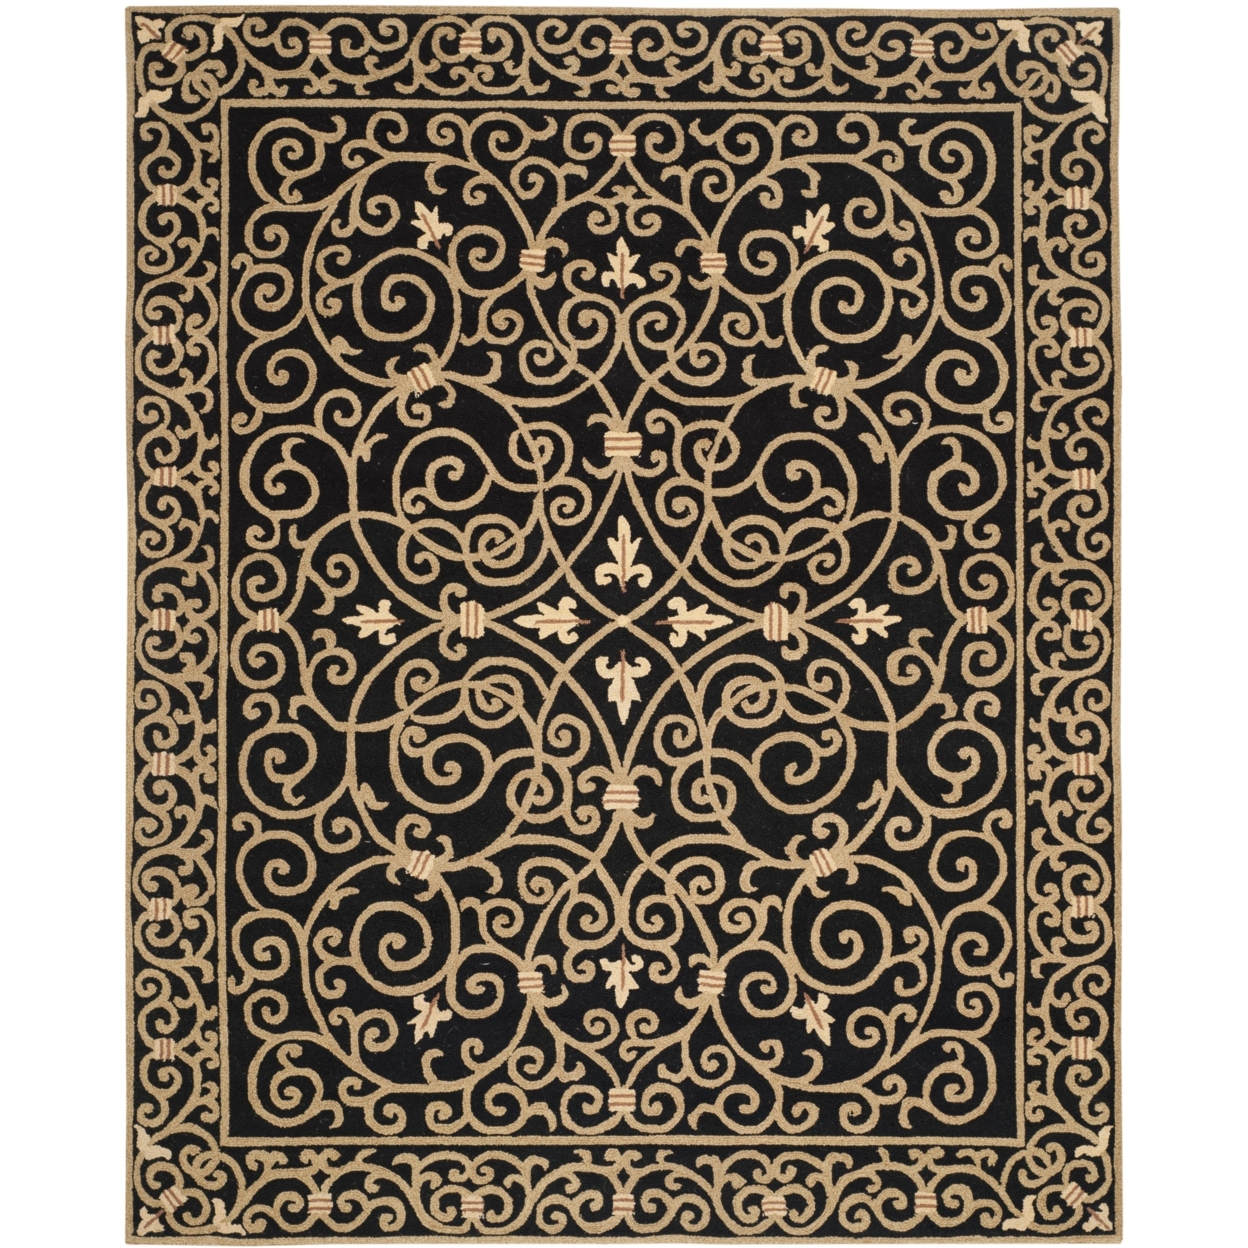 SAFAVIEH Chelsea Collection HK11A Hand-hooked Black Rug - 7' 6 X 9' 6 Oval